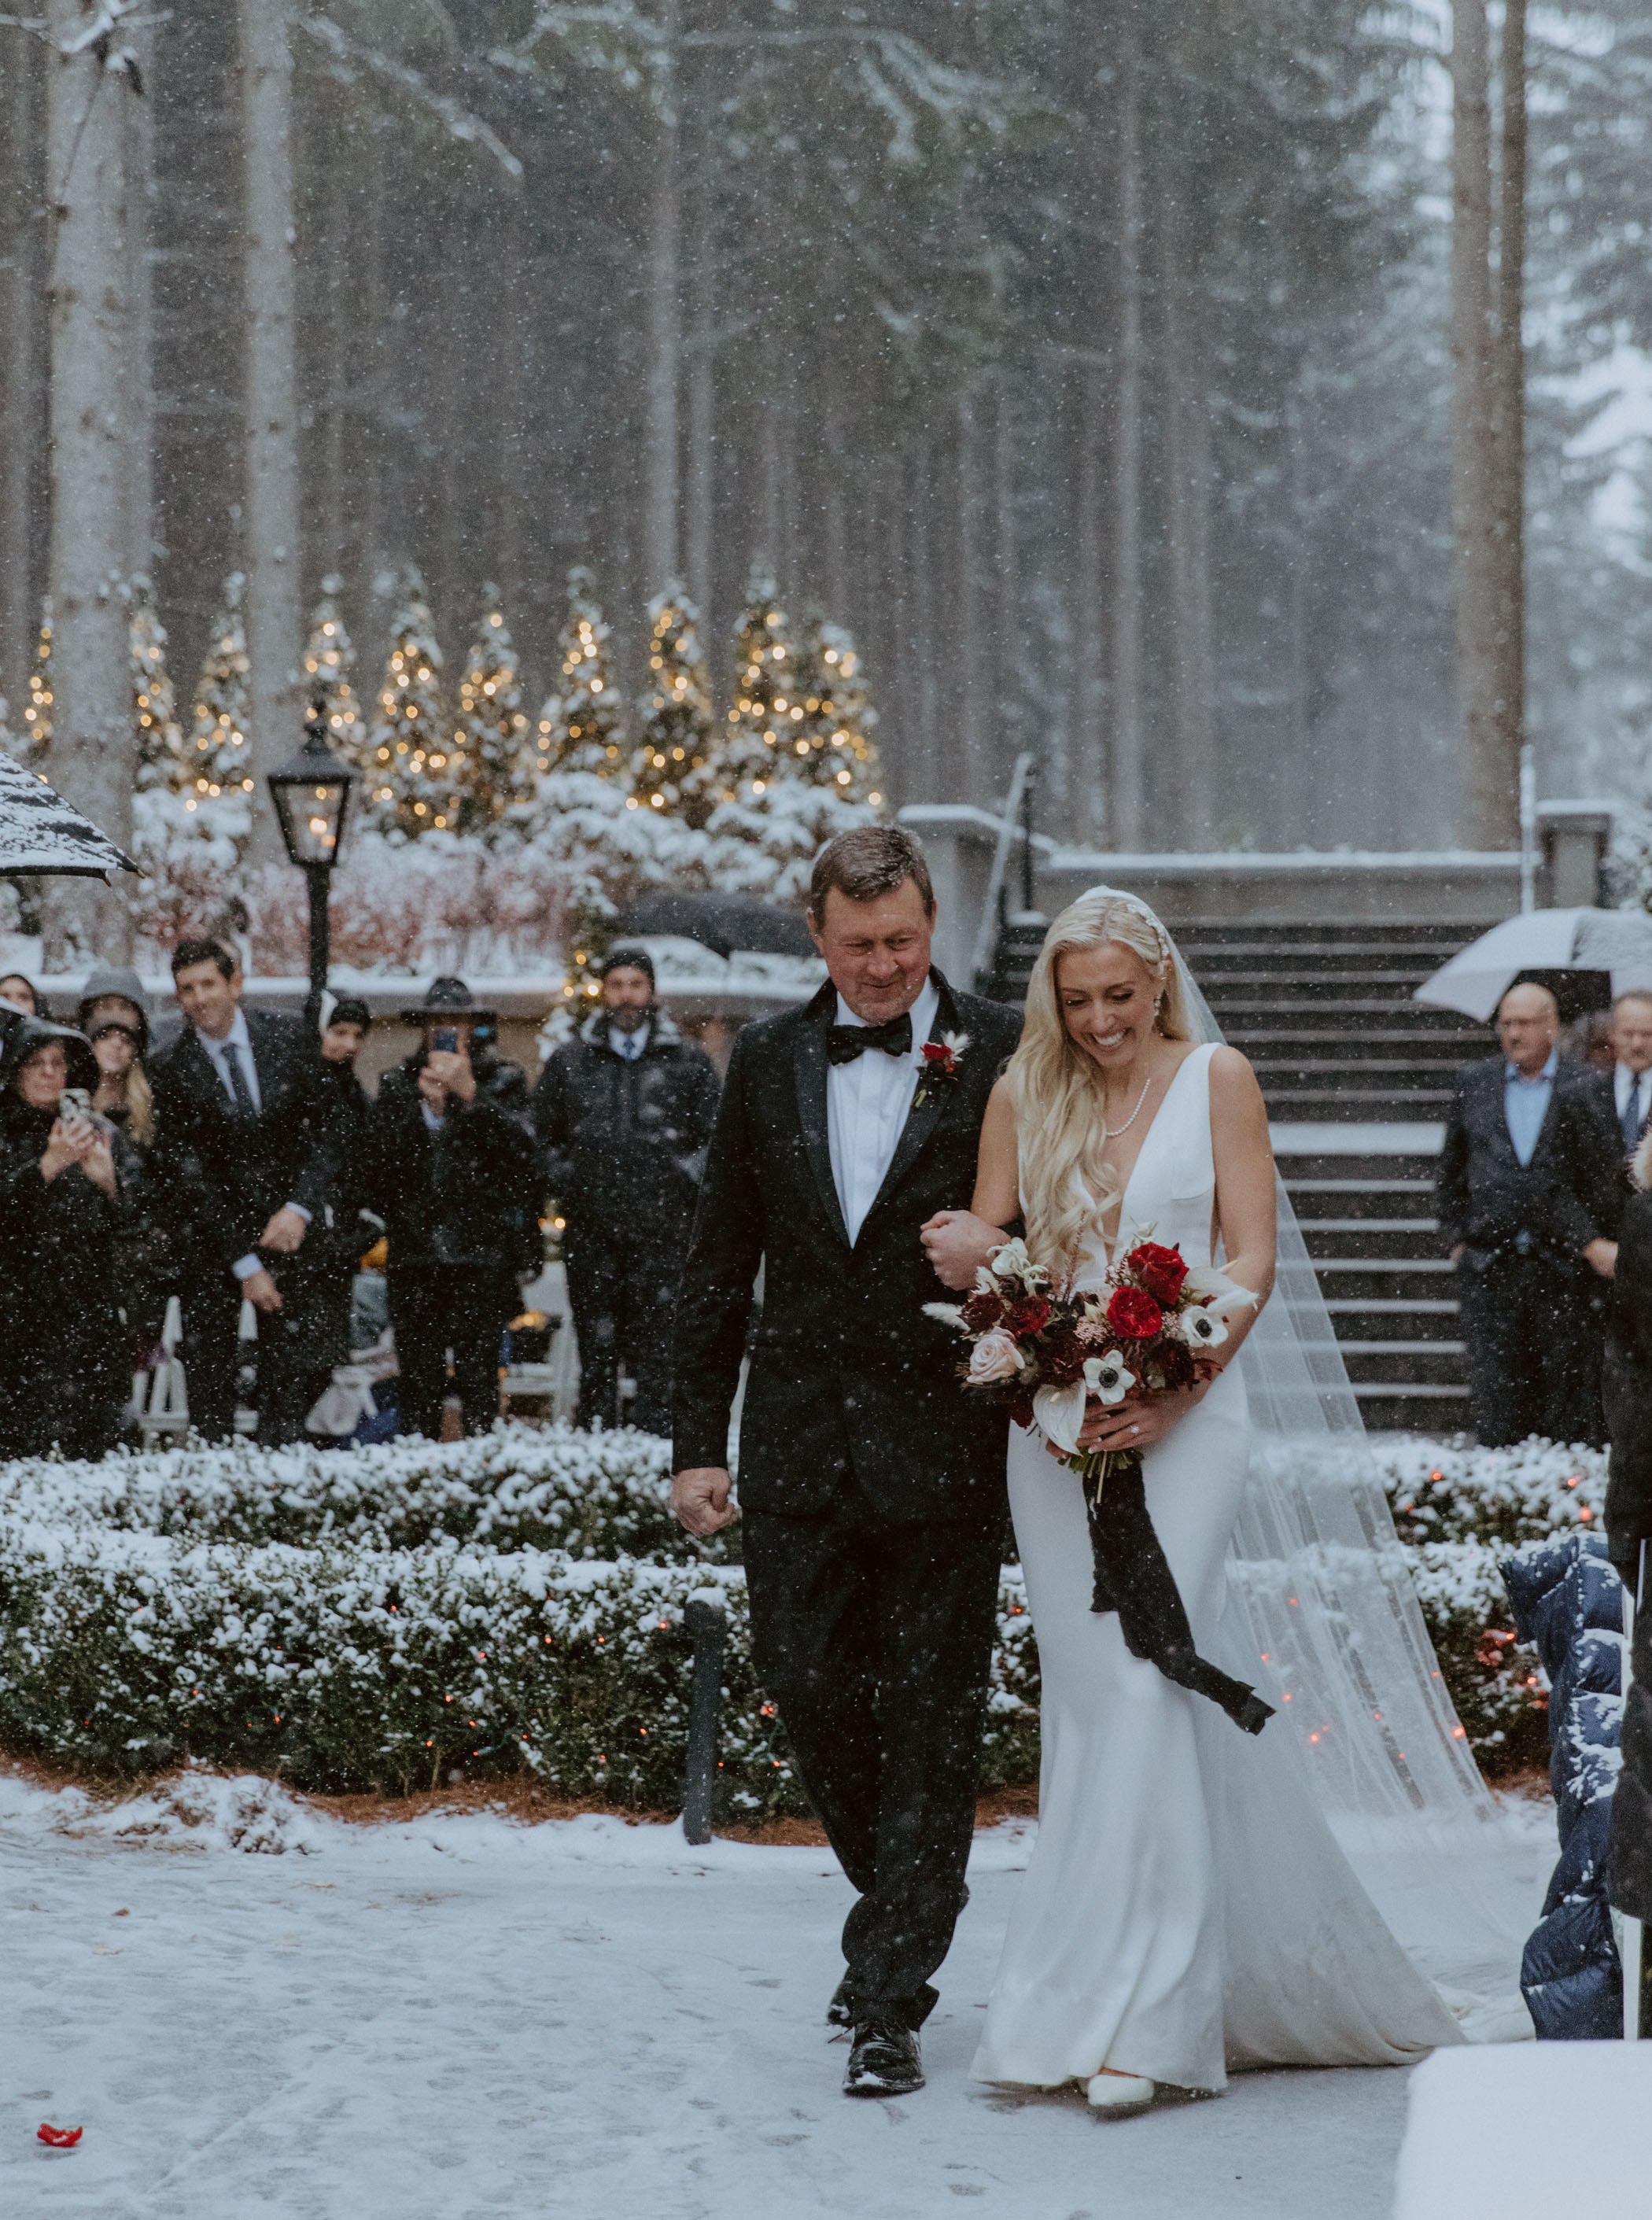 Bride walking down the aisle in snow